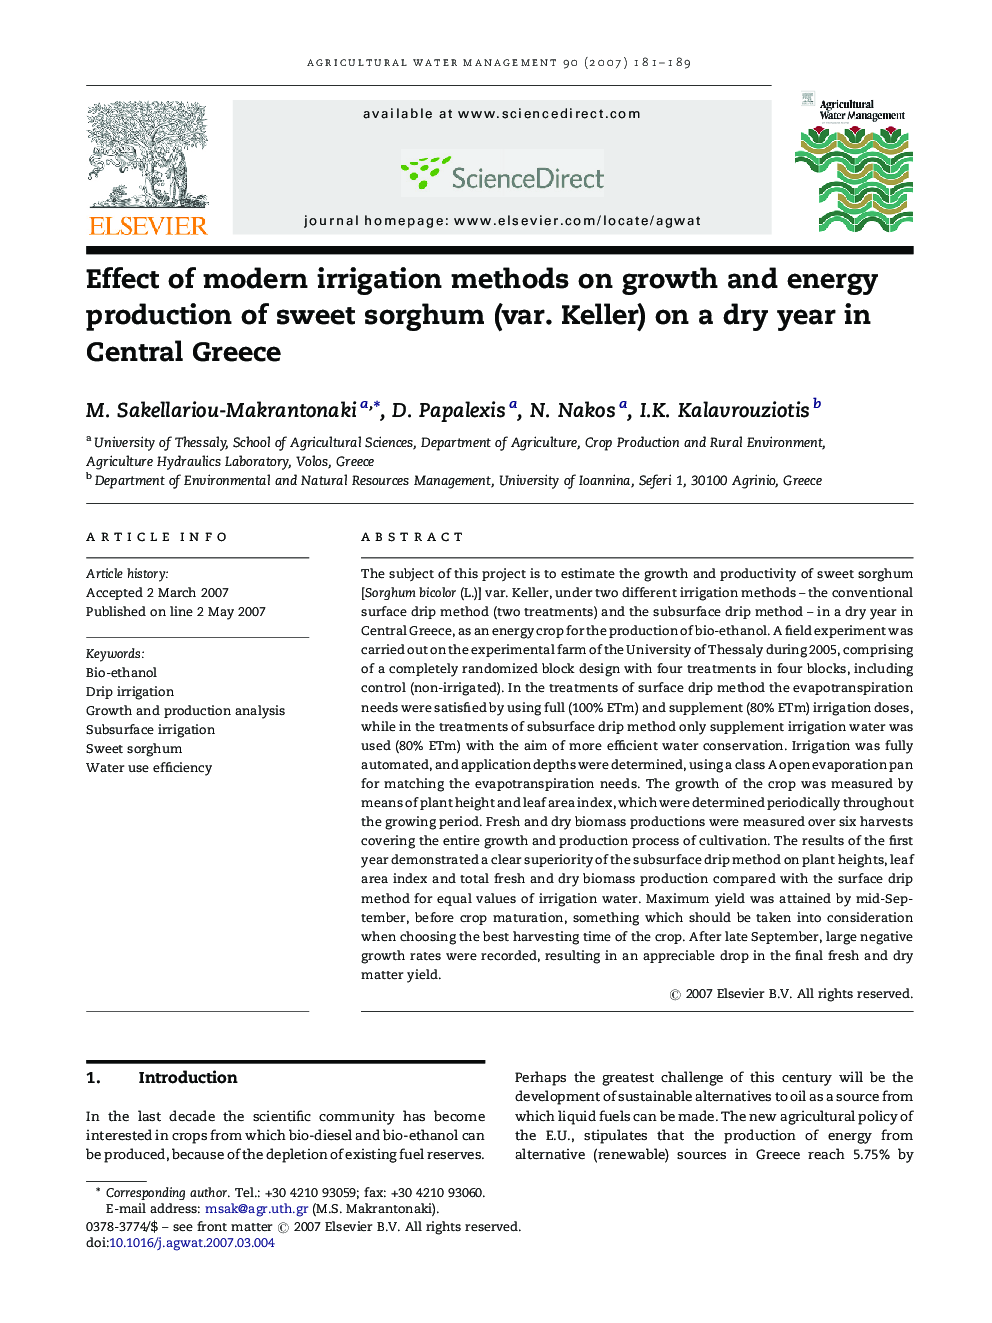 Effect of modern irrigation methods on growth and energy production of sweet sorghum (var. Keller) on a dry year in Central Greece